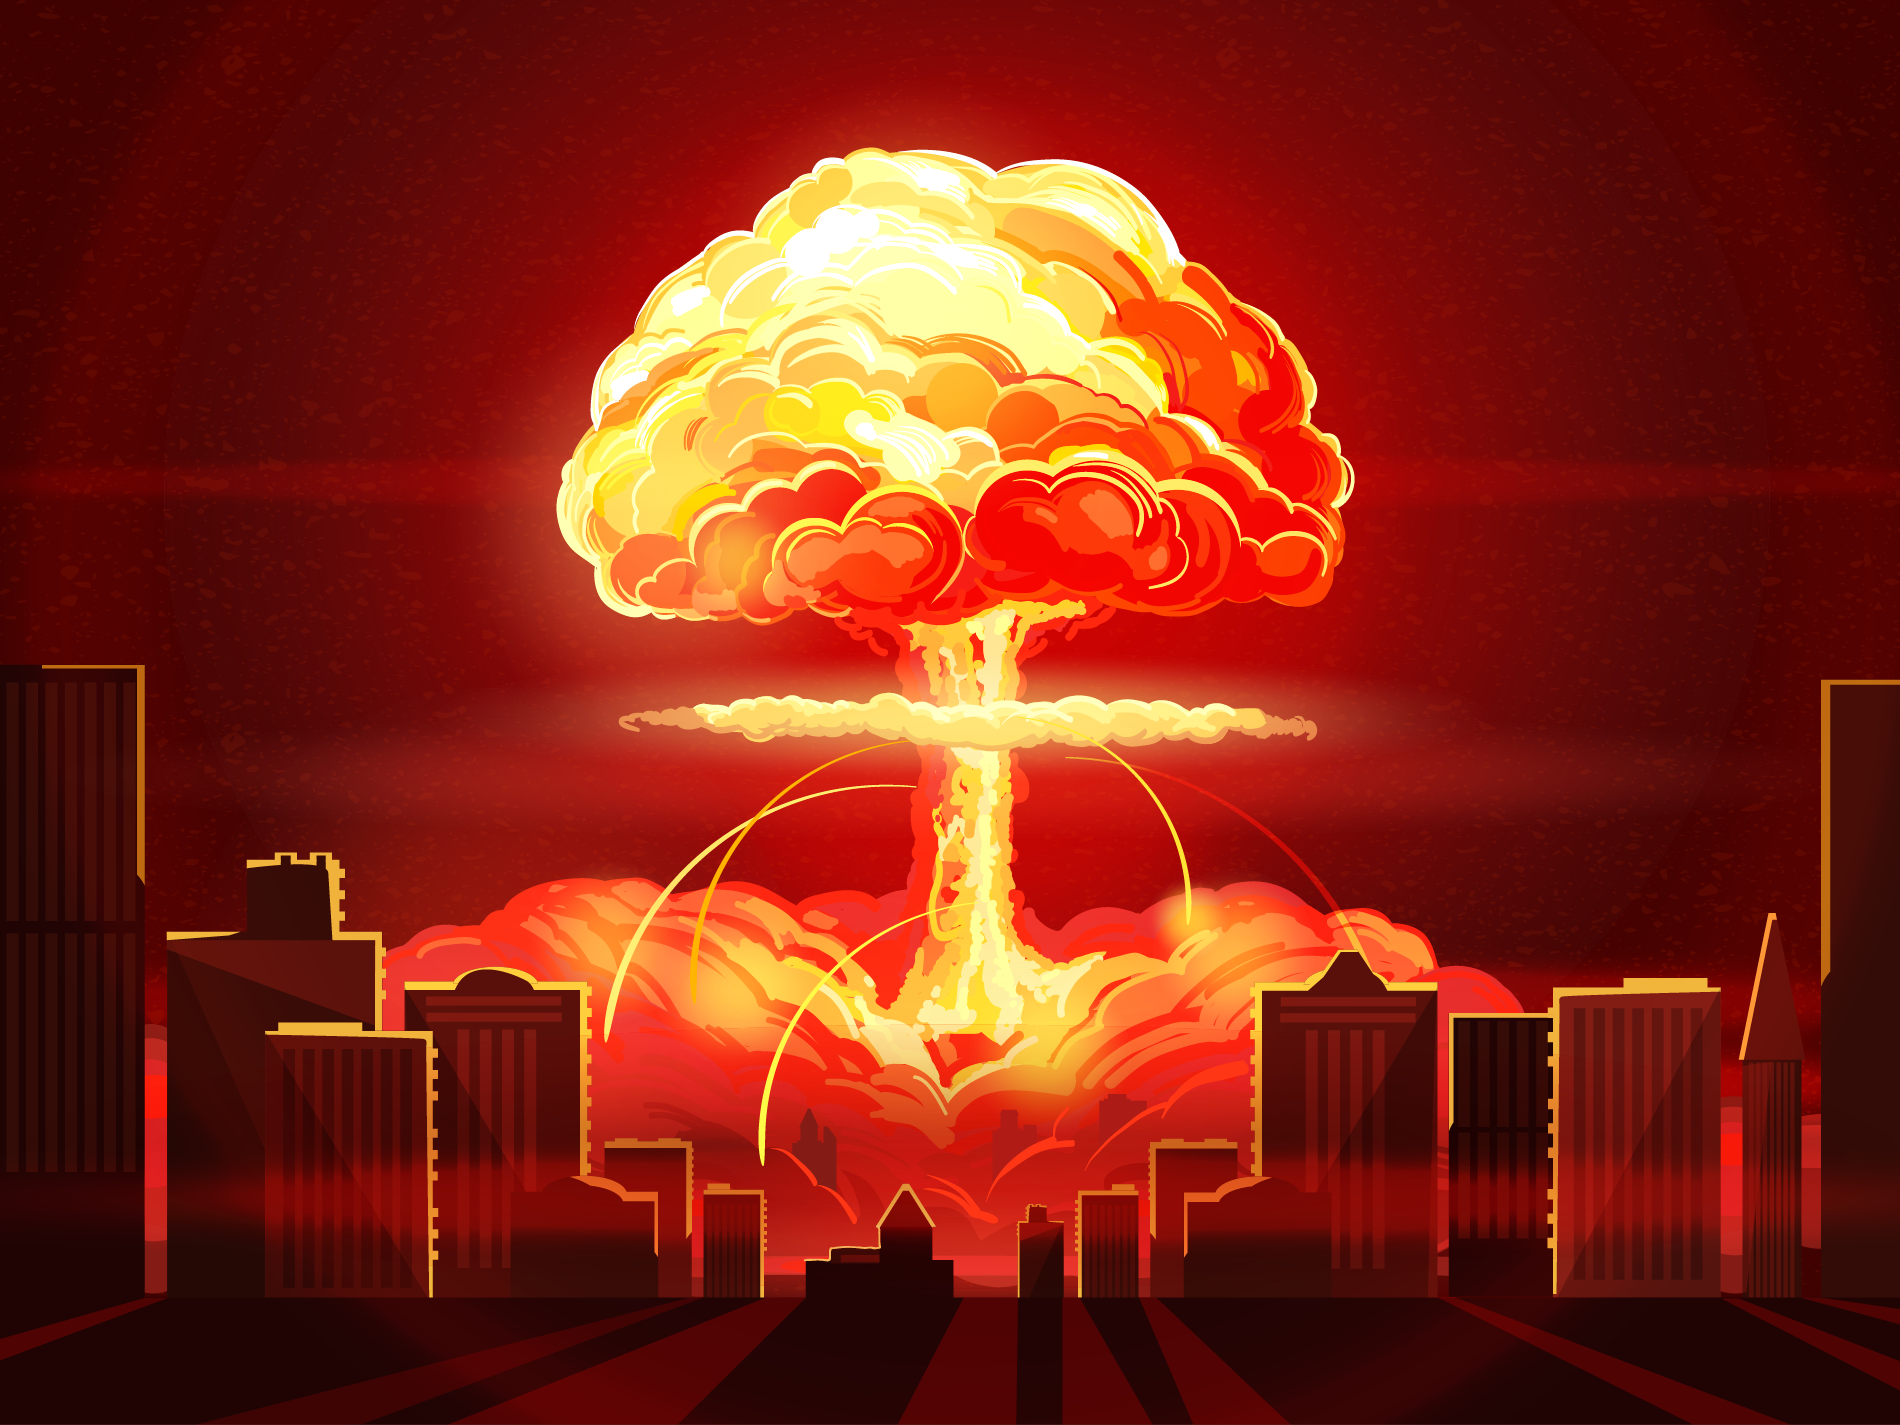 Nuclear explosion to illustrate the huge refactoring